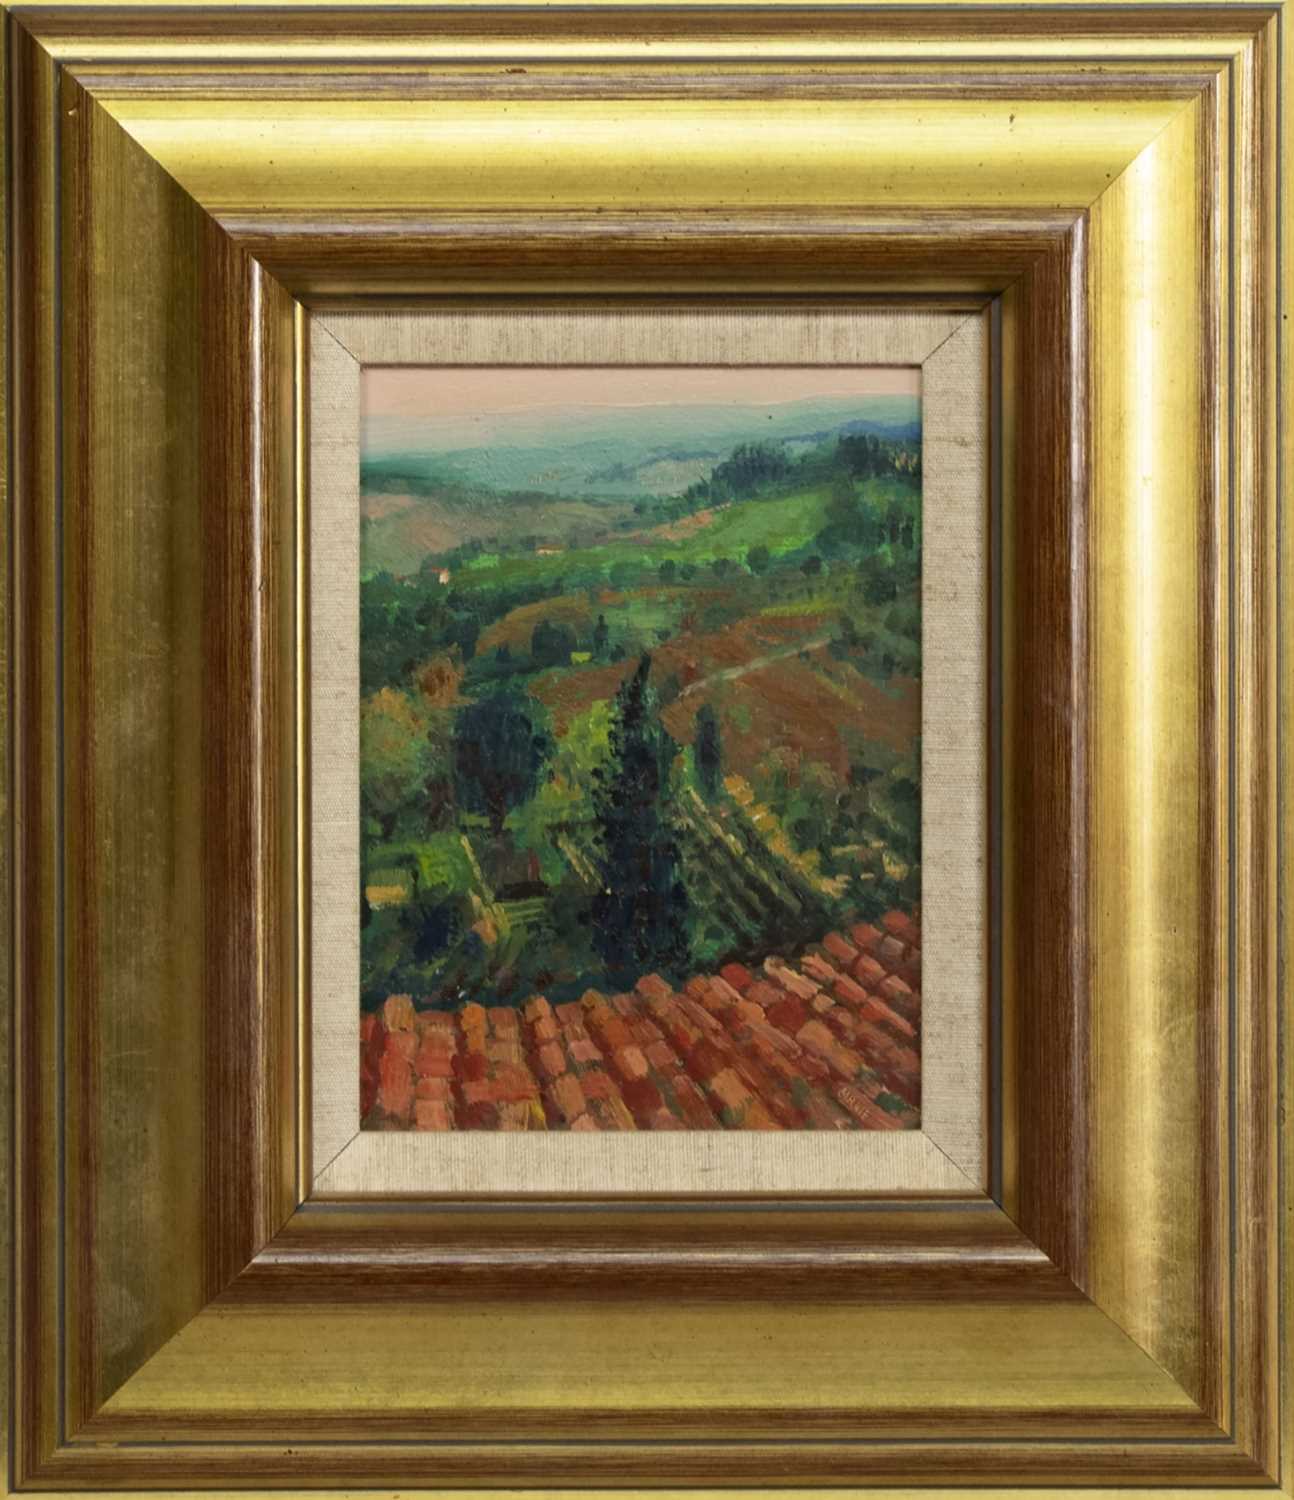 LANDSCAPE IN TUSCANY, AN OIL BY WILLIAM BIRNIE